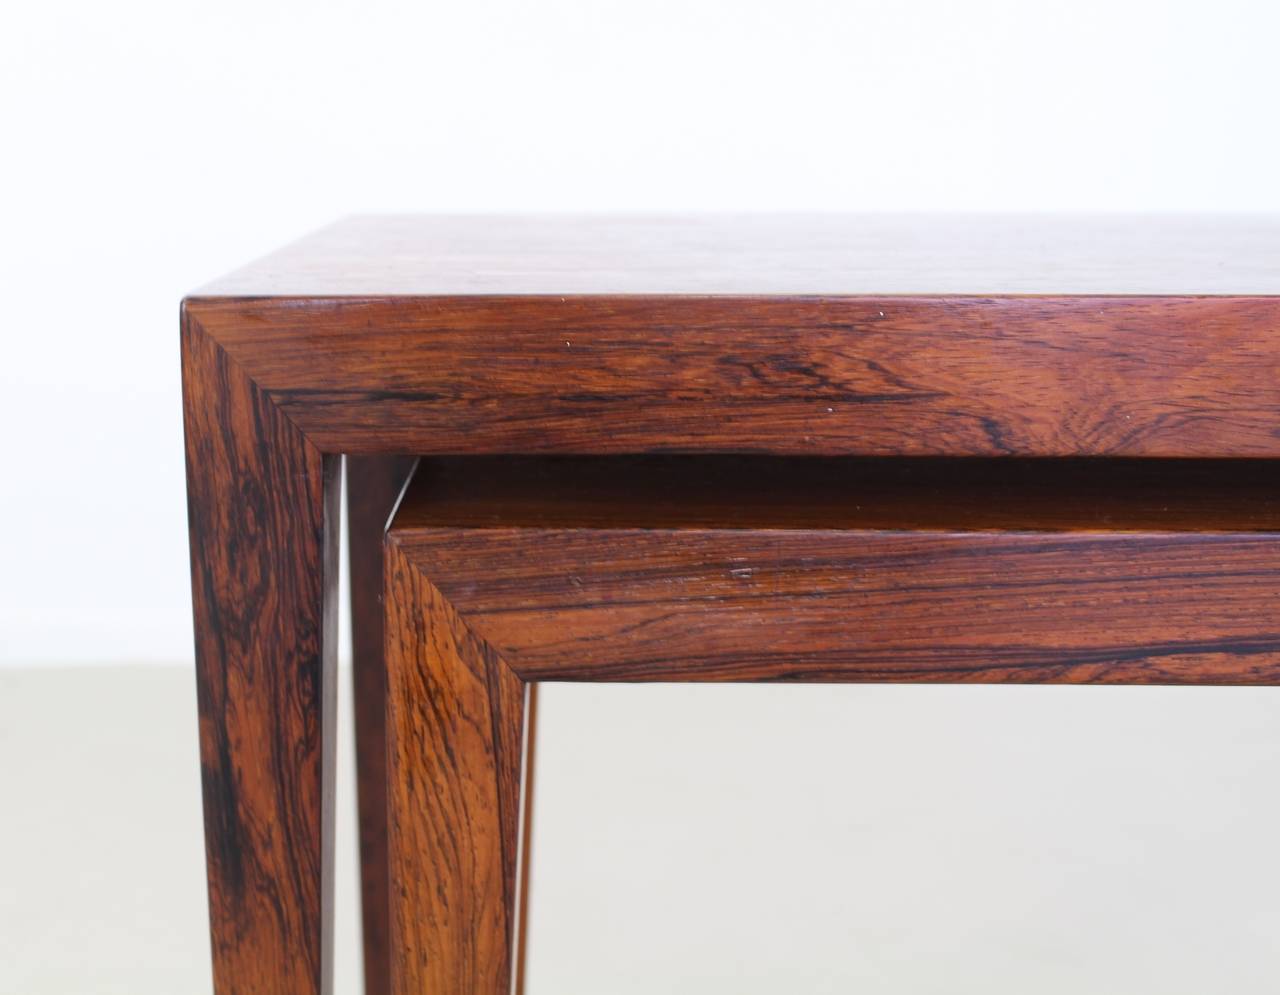 Excellent set of two rosewood nesting tables.
Designer: Severin Hansen.
Manufacturer: Bovenkamp.
Rosewood and rosewood veneer.
Dimensions: Smaller table: 26 x 38 x 41 (D x W x H).